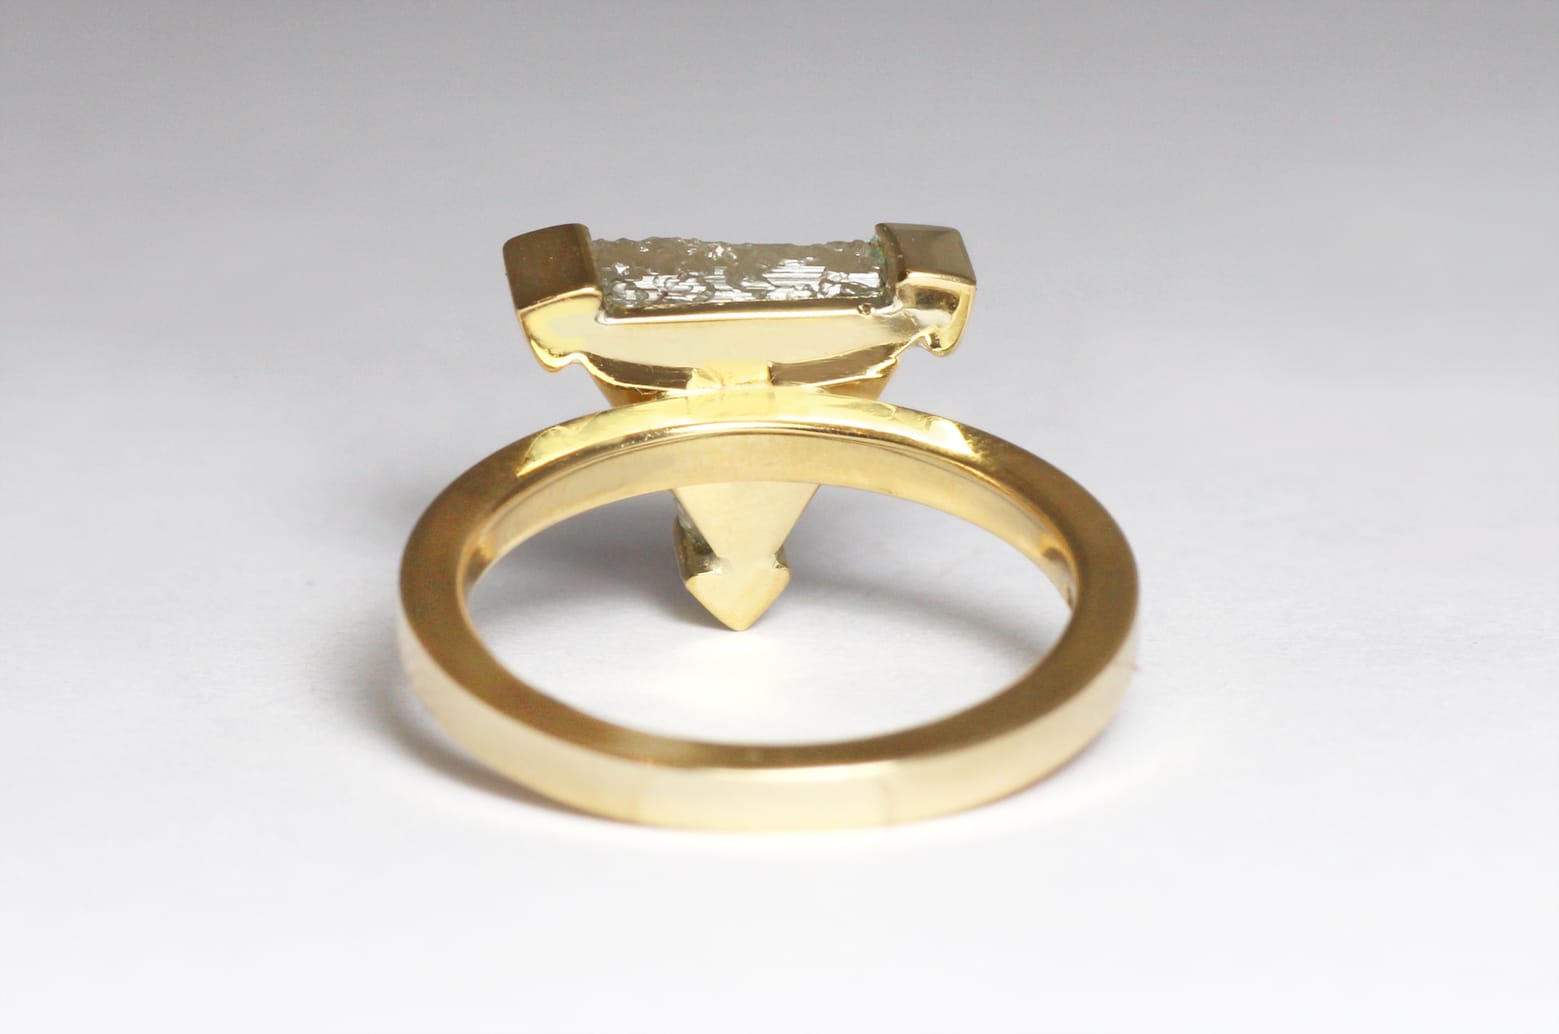 18ct Fairtrade gold ring with Australian macle diamond